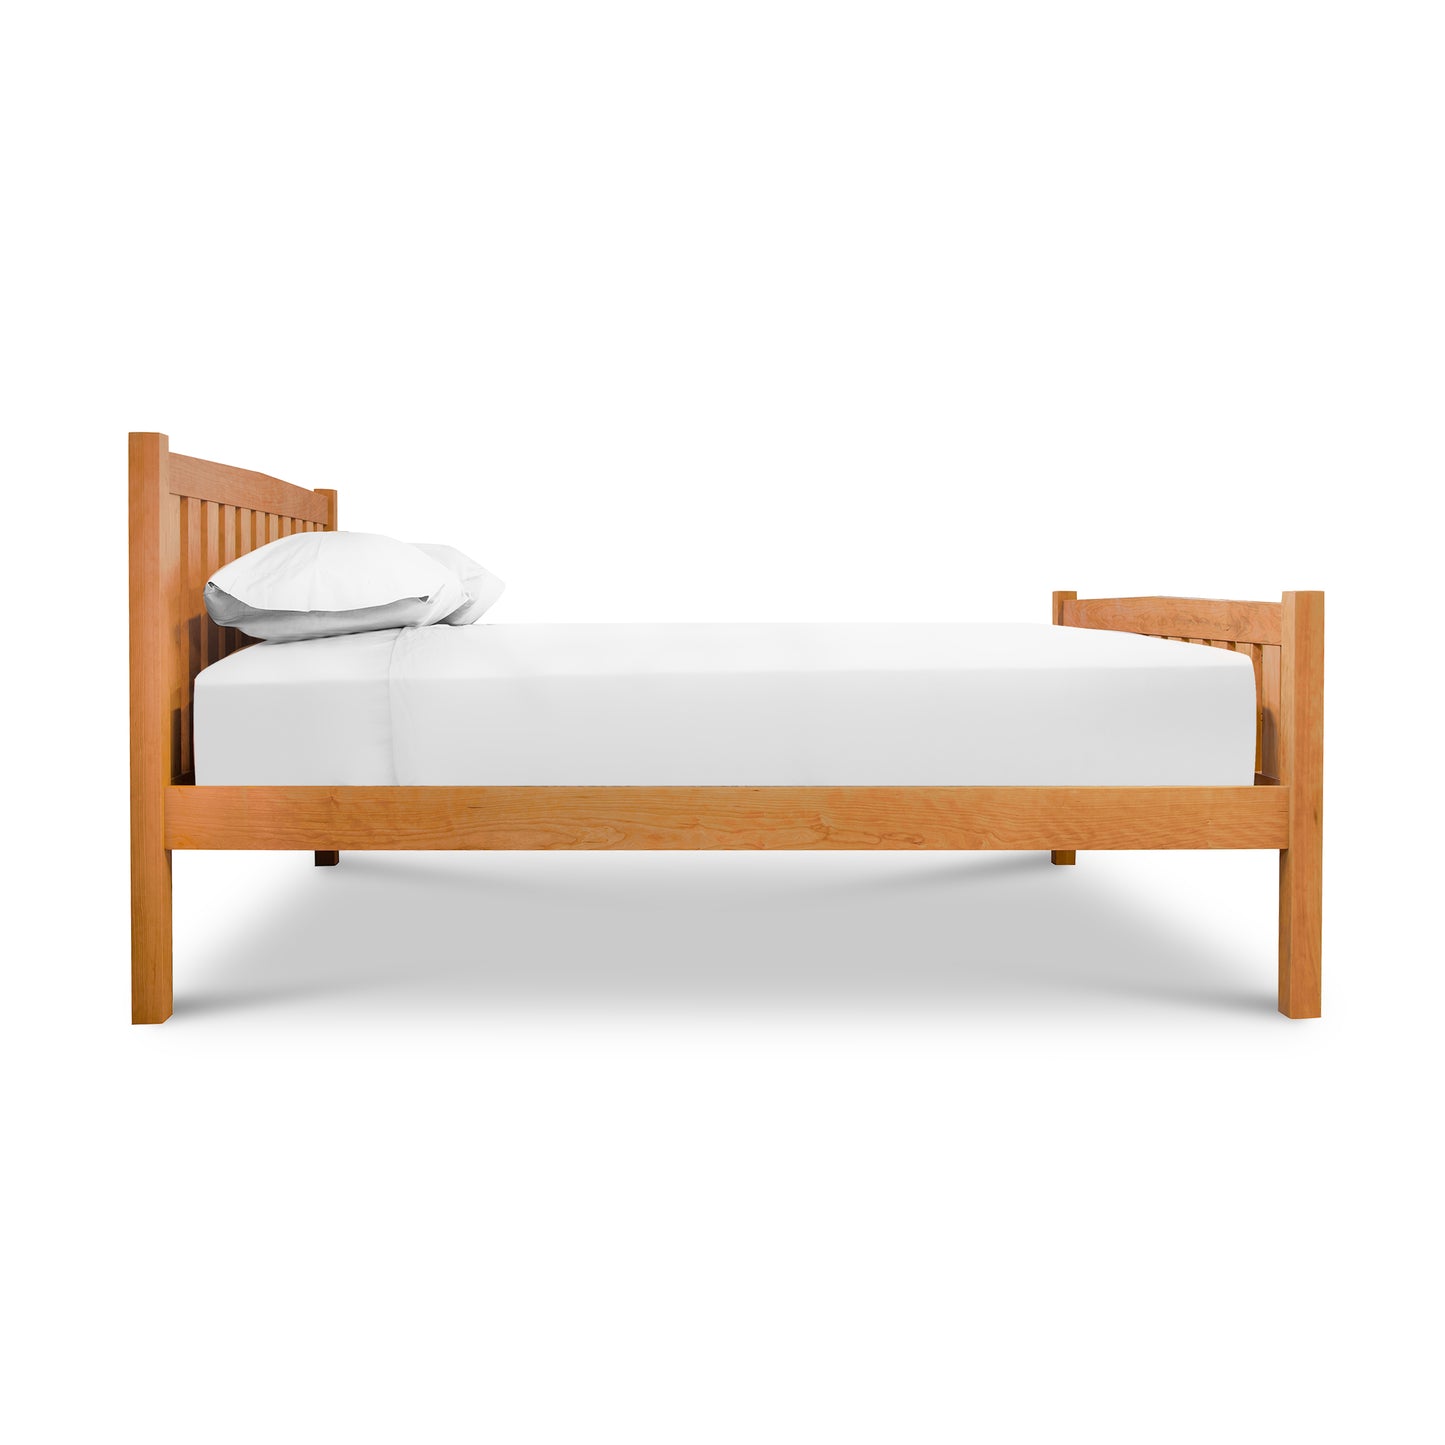 A solid cherry wood Vermont Furniture Designs Bennington Bed with High Footboard - Queen - Floor Model with white sheets on it.